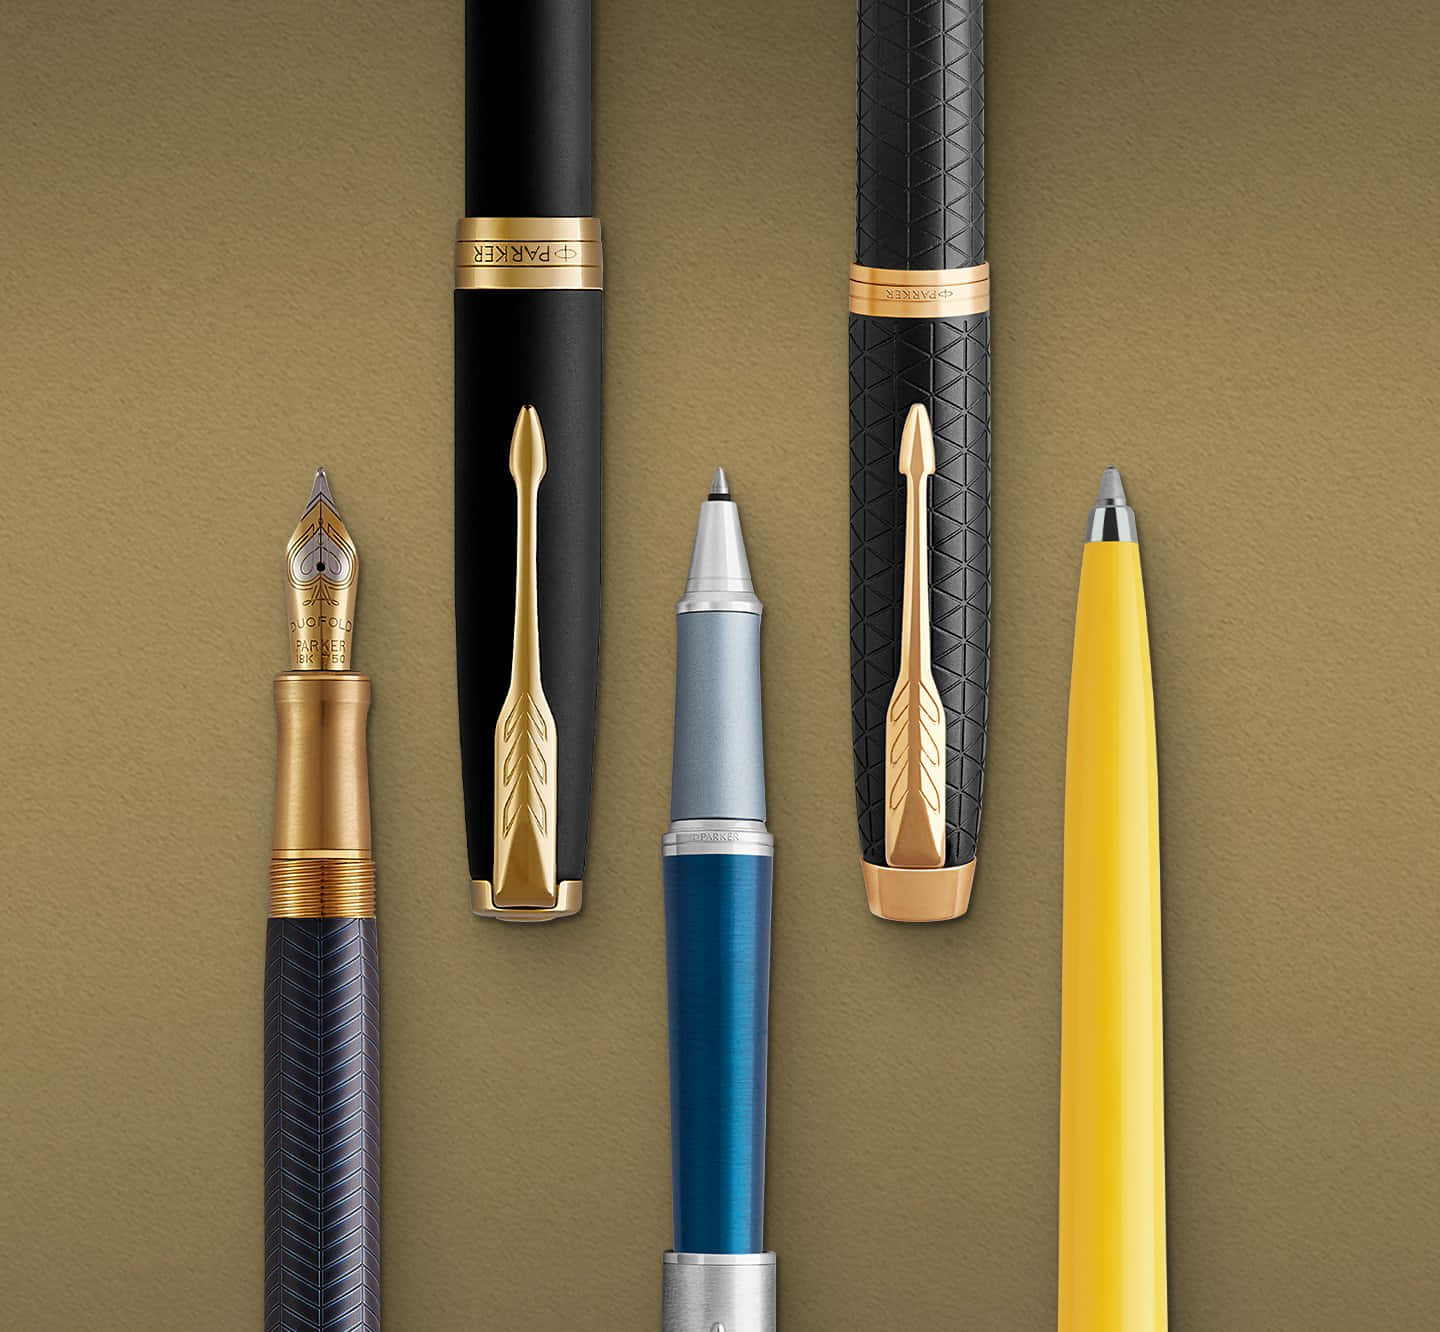 A Group Of Pens With Different Colors And Styles